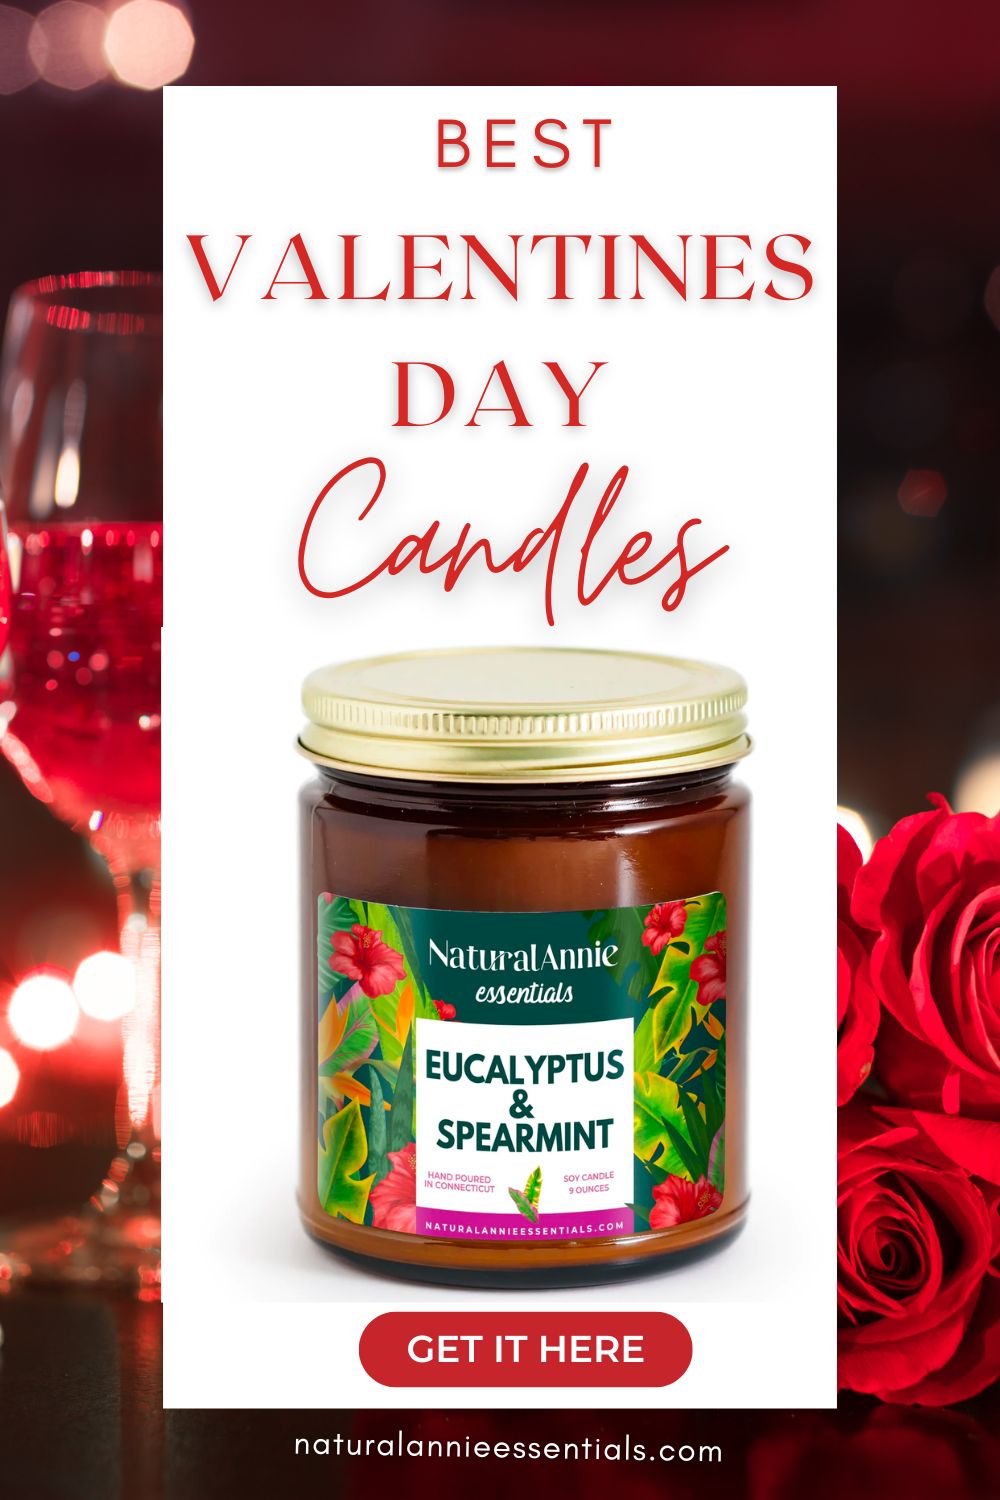 EUCALYPTUS & SPEARMINT SCENTED SOY CANDLE VALENTINES DAY CANDLE